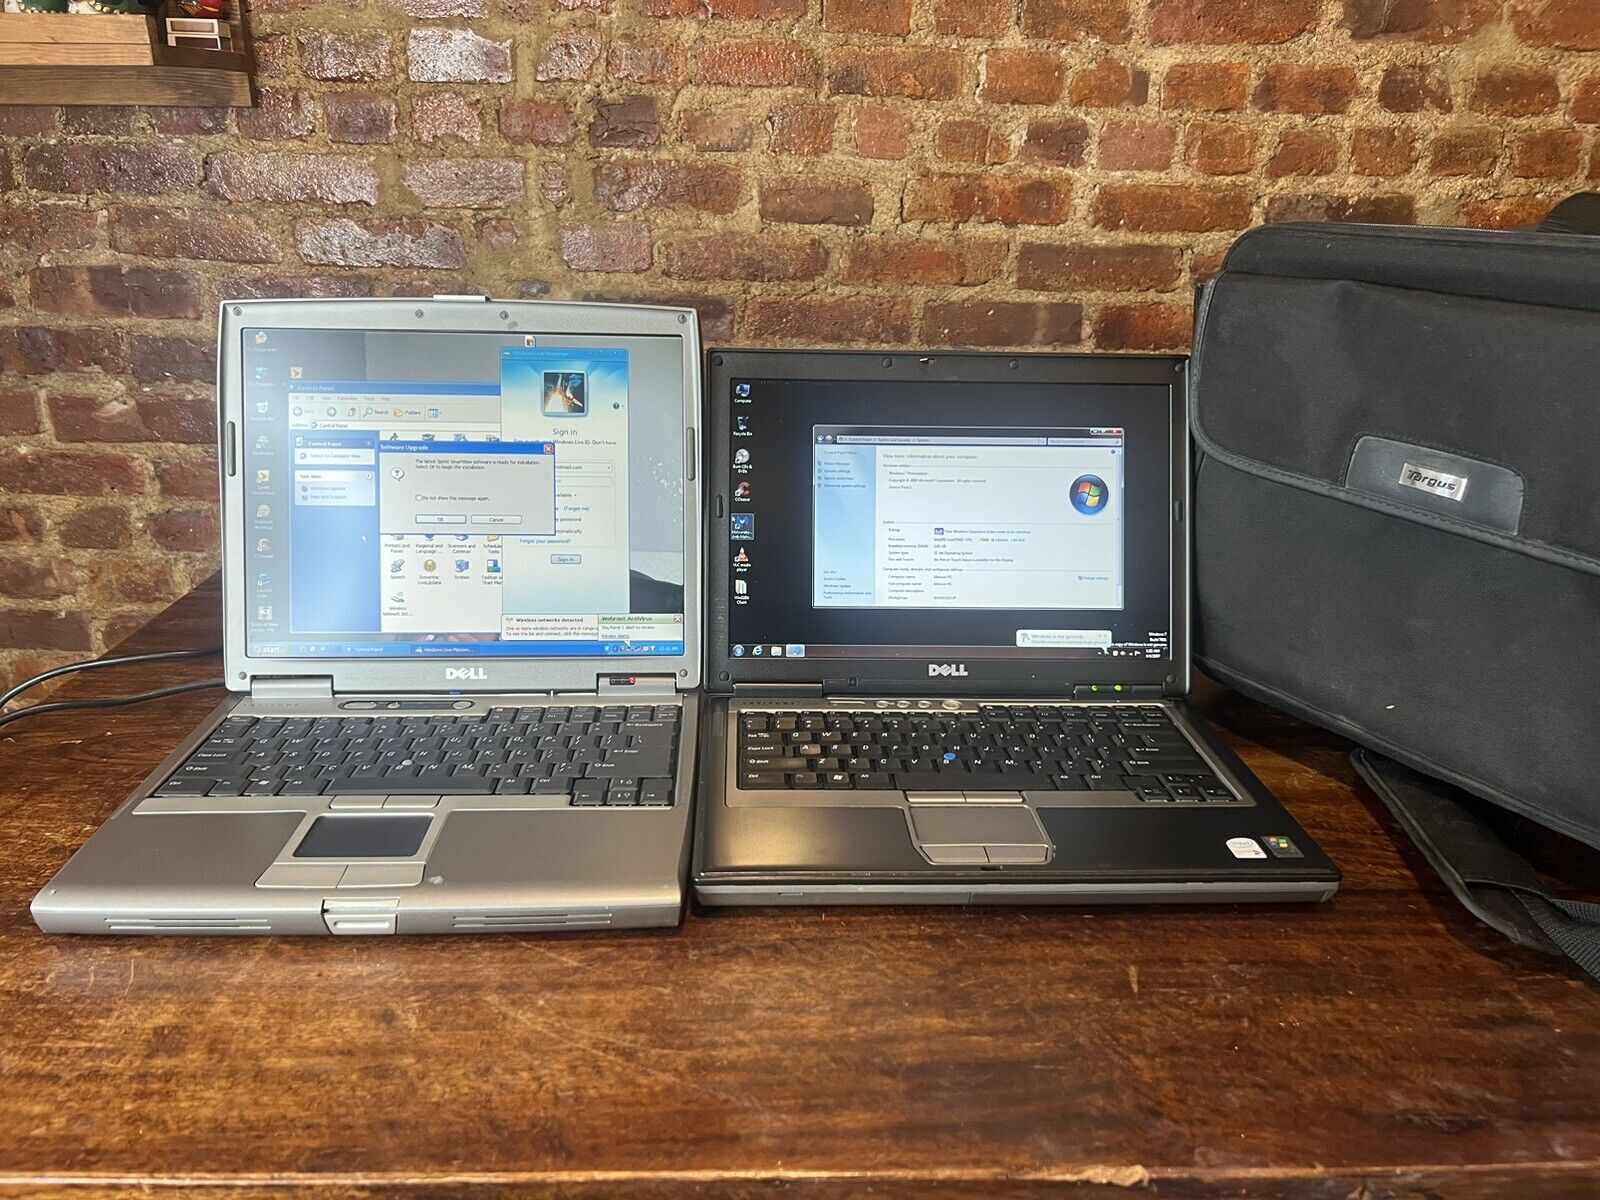 Two Dell Laptops | Latitude D620 & D610 | Two Chargers & Case